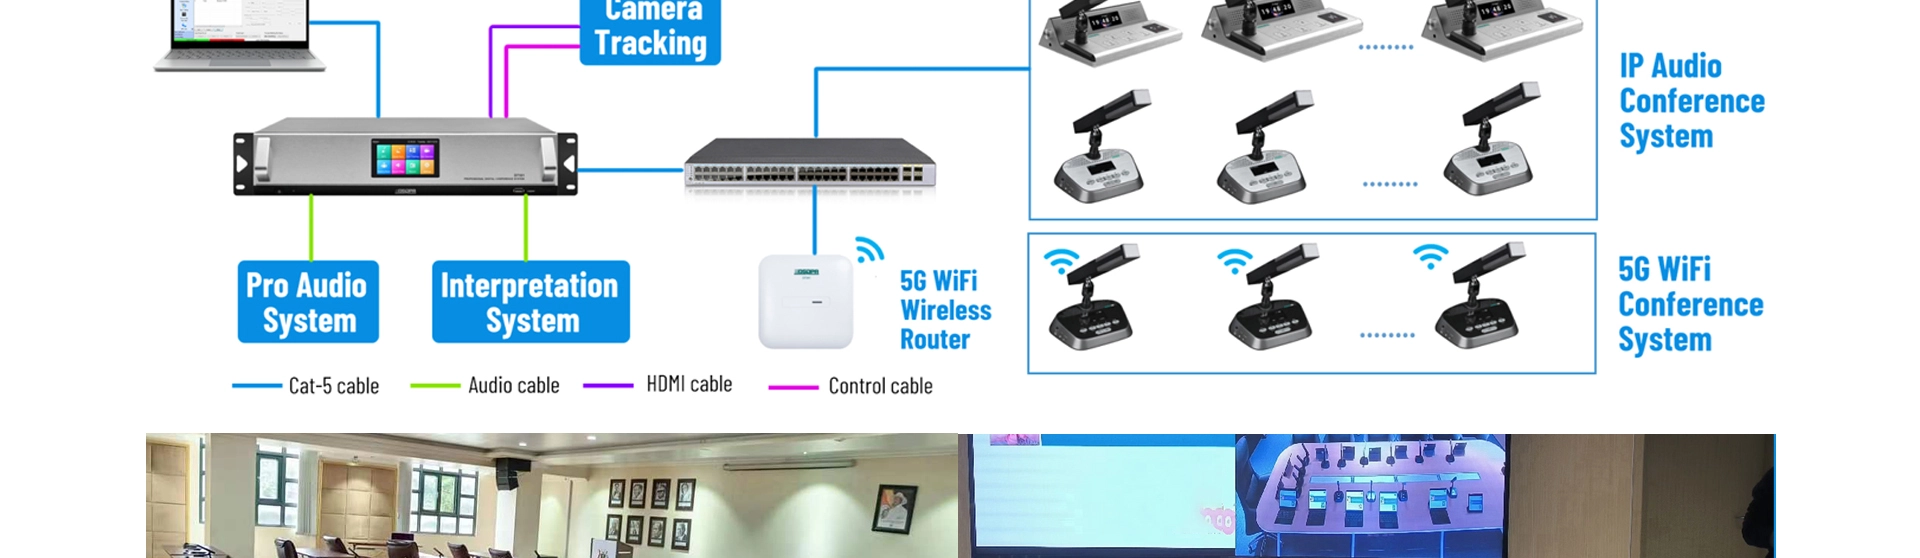 Wireless Conference System Software